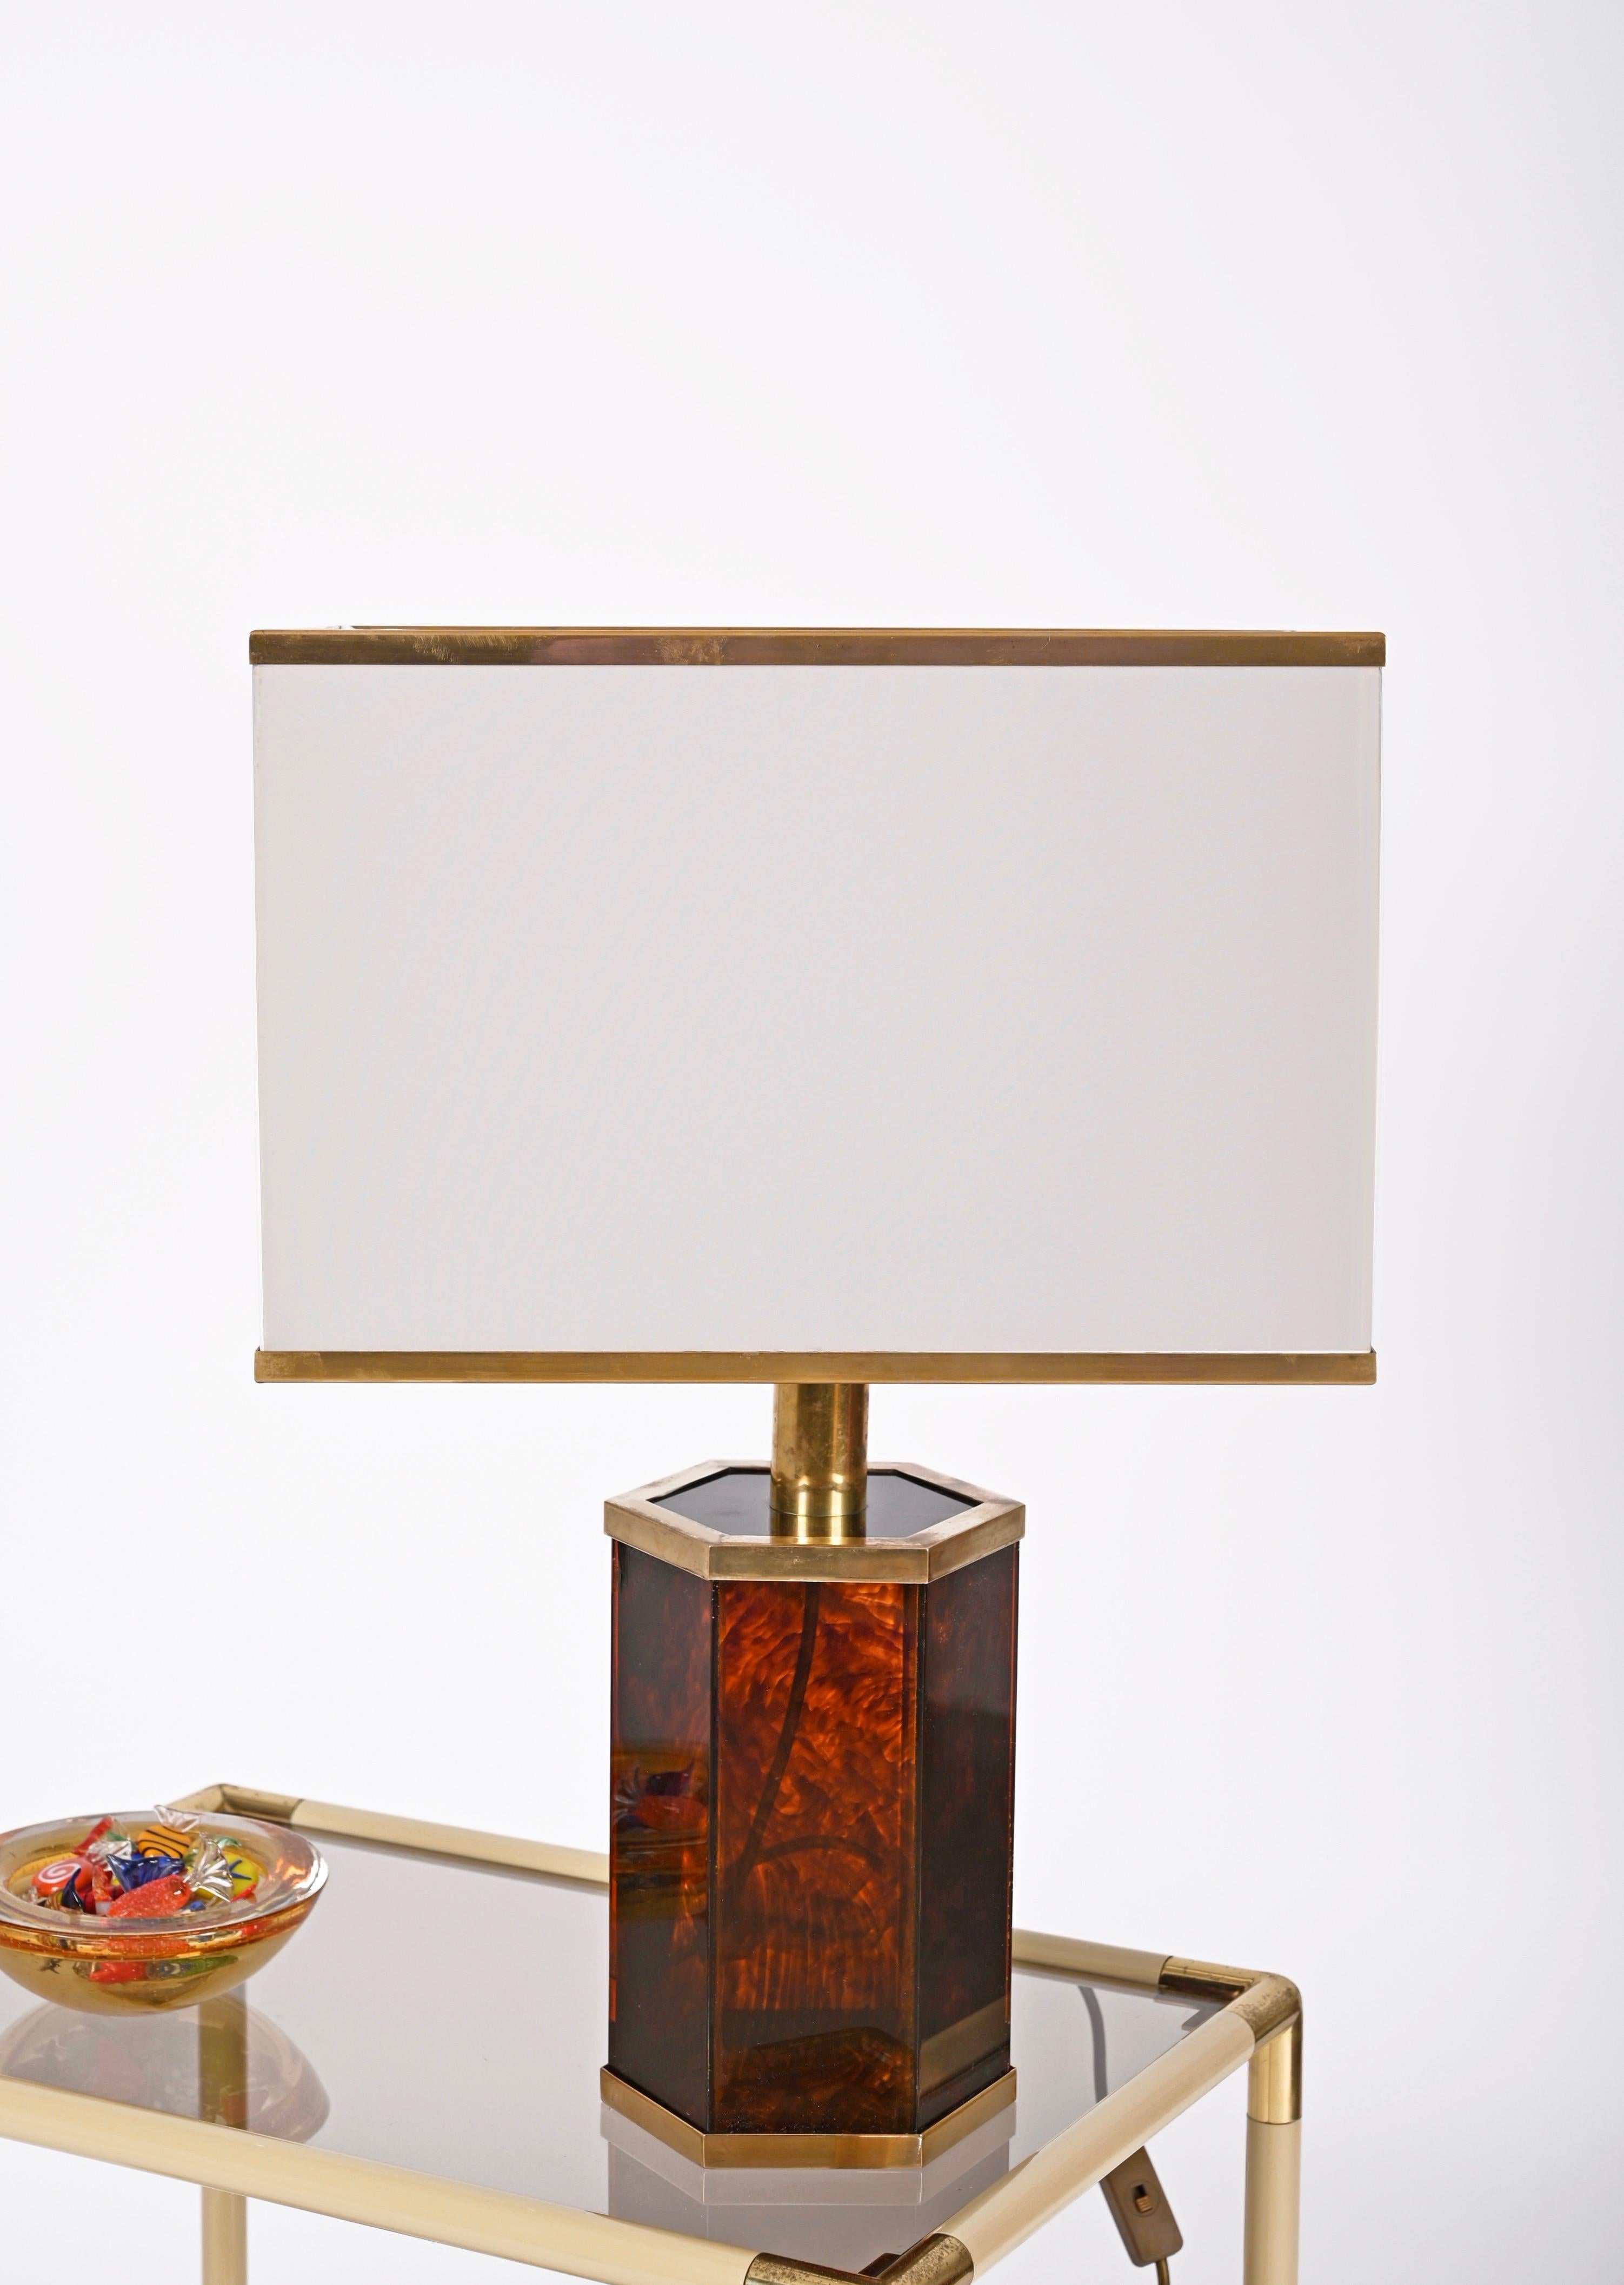 Gorgeous hexagonal table lamp in tortoiseshell effect lucite and brass. This stunning lamp, was designed in Italy in the 1970s in the style of Willy Rizzo.

The lamp features an hexagonal shaped base in lucite with brass finishes.
The